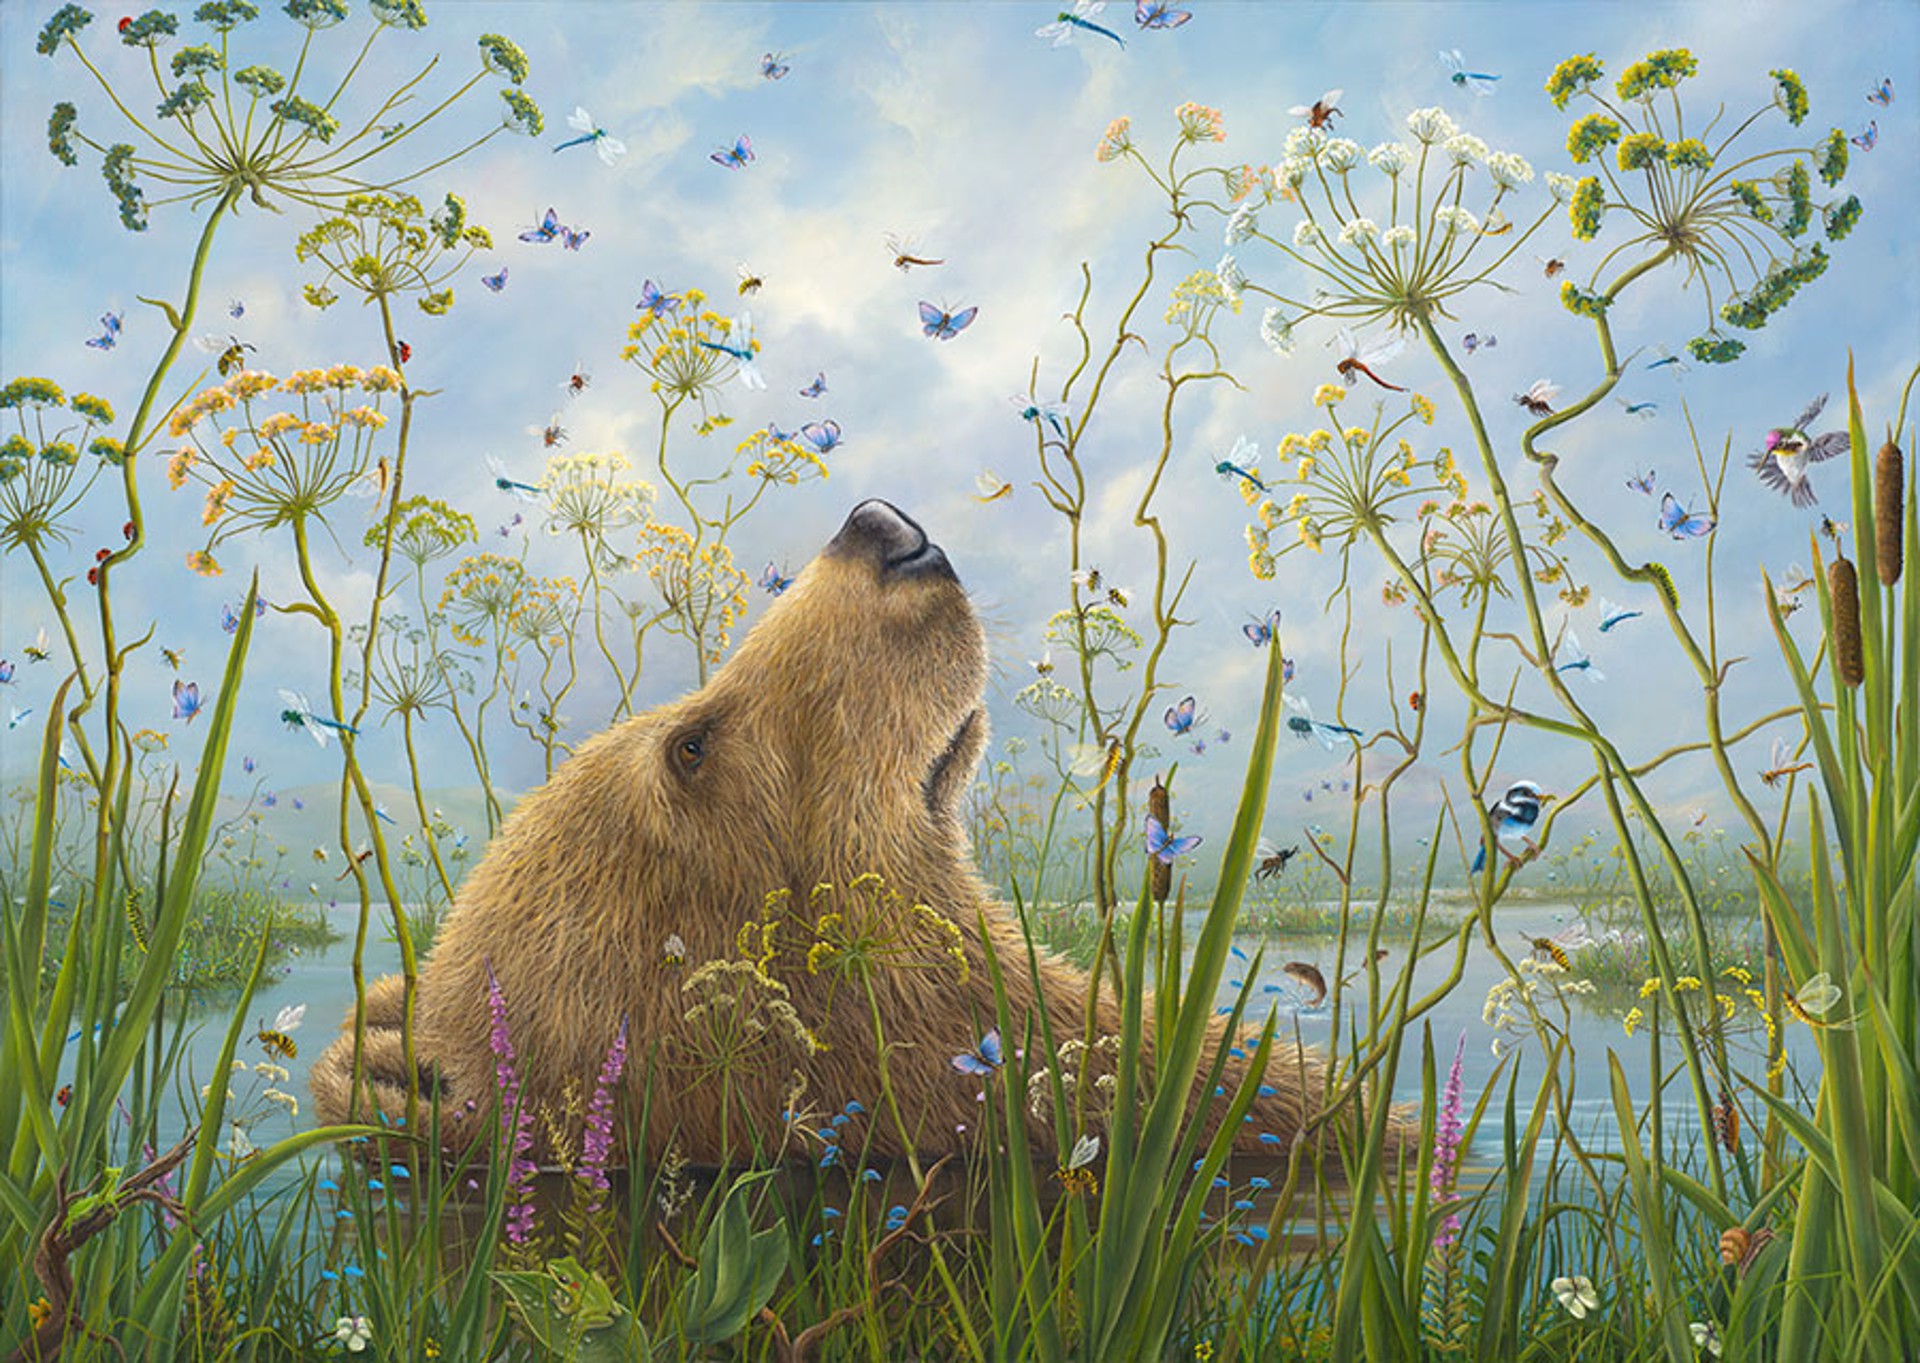 The Whole World by Robert Bissell